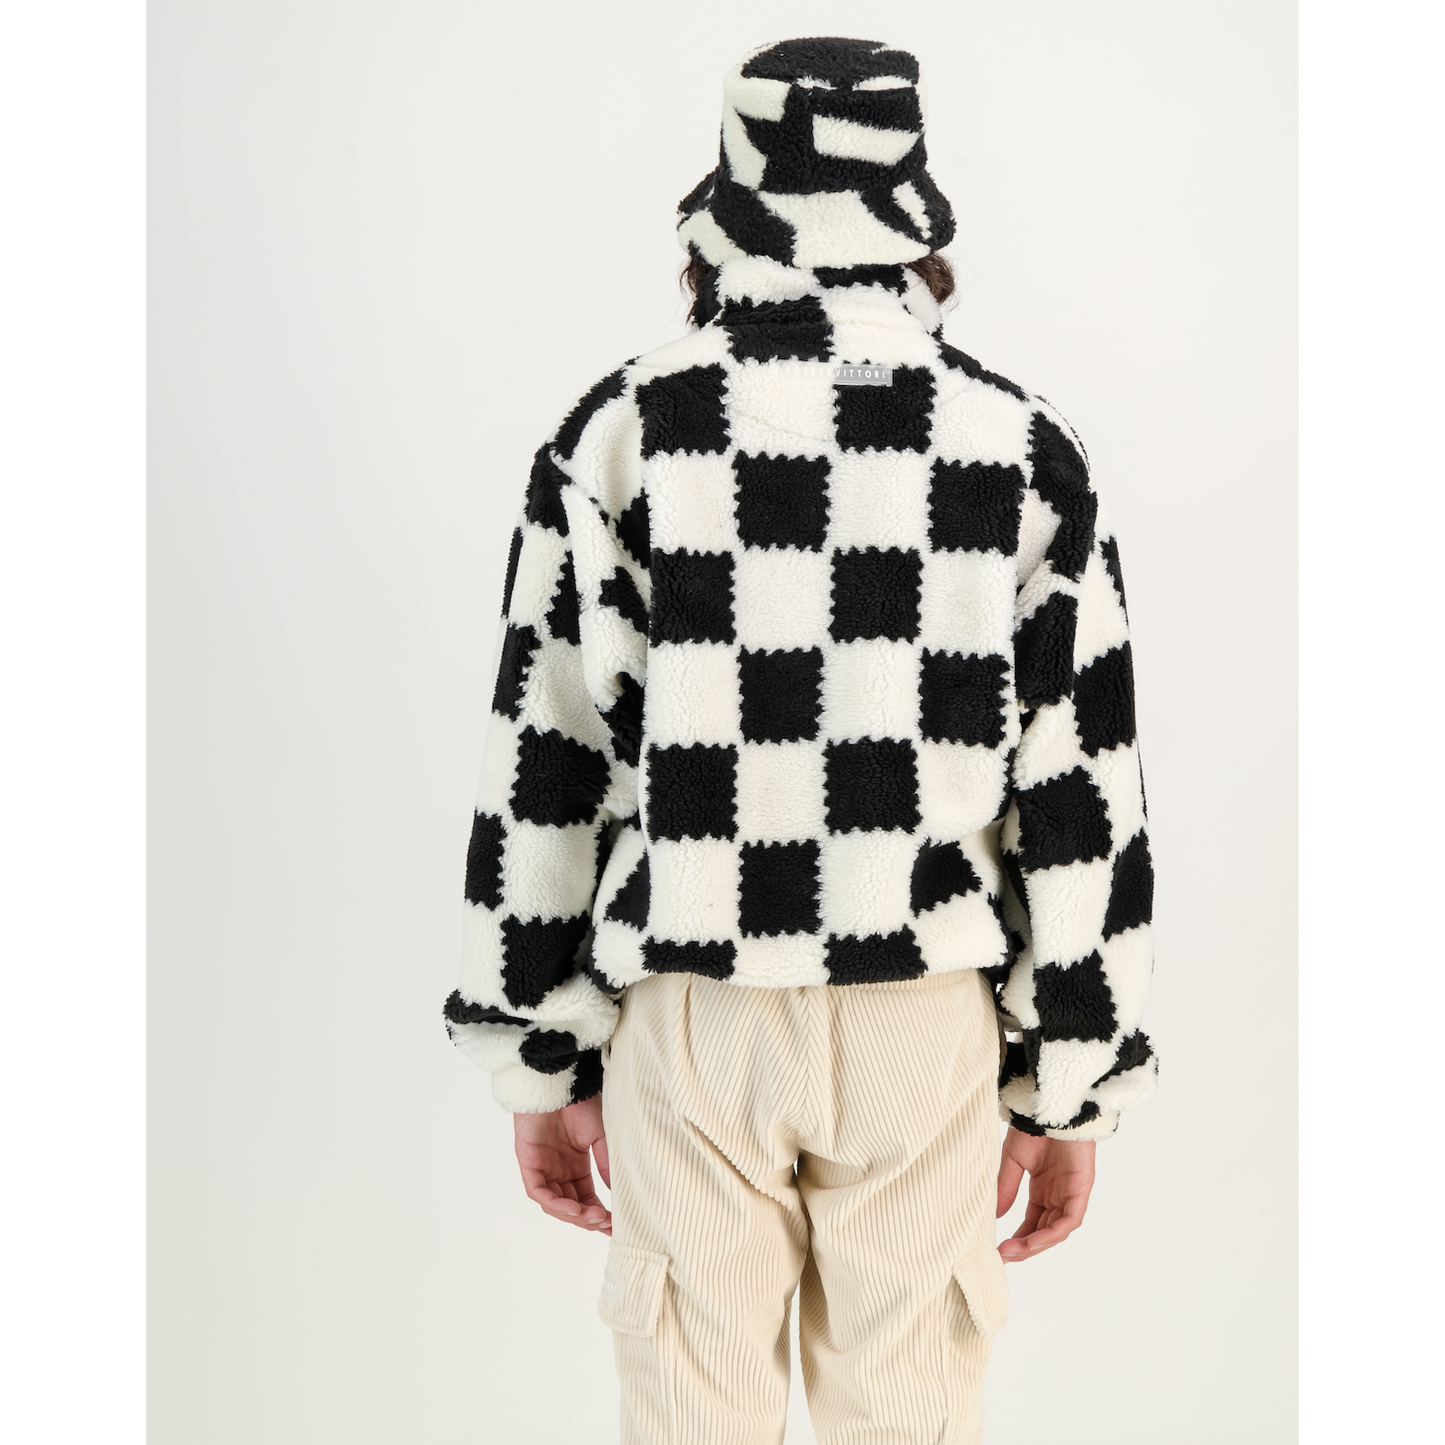 Sherpa Pull Over Sweater in Black & White Check